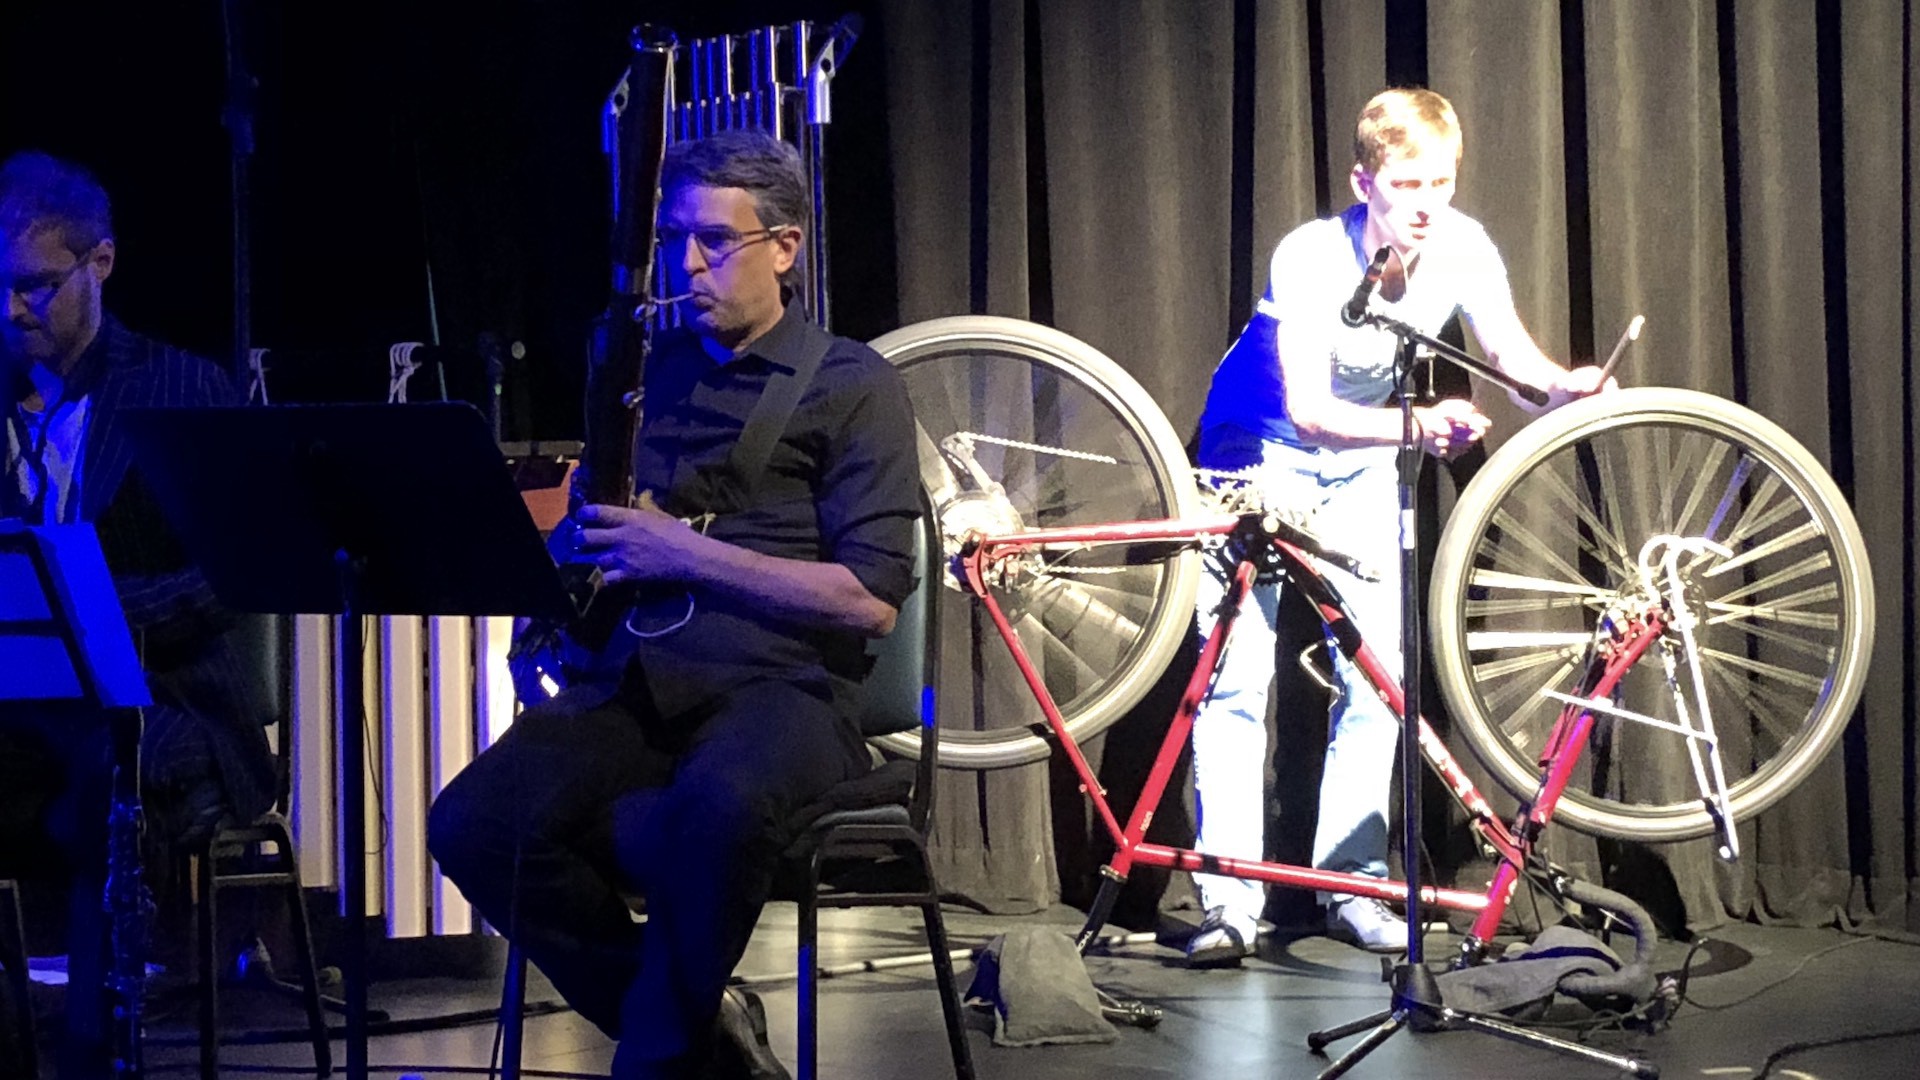 A percissionist hitting an upside-down bicycle on a stage